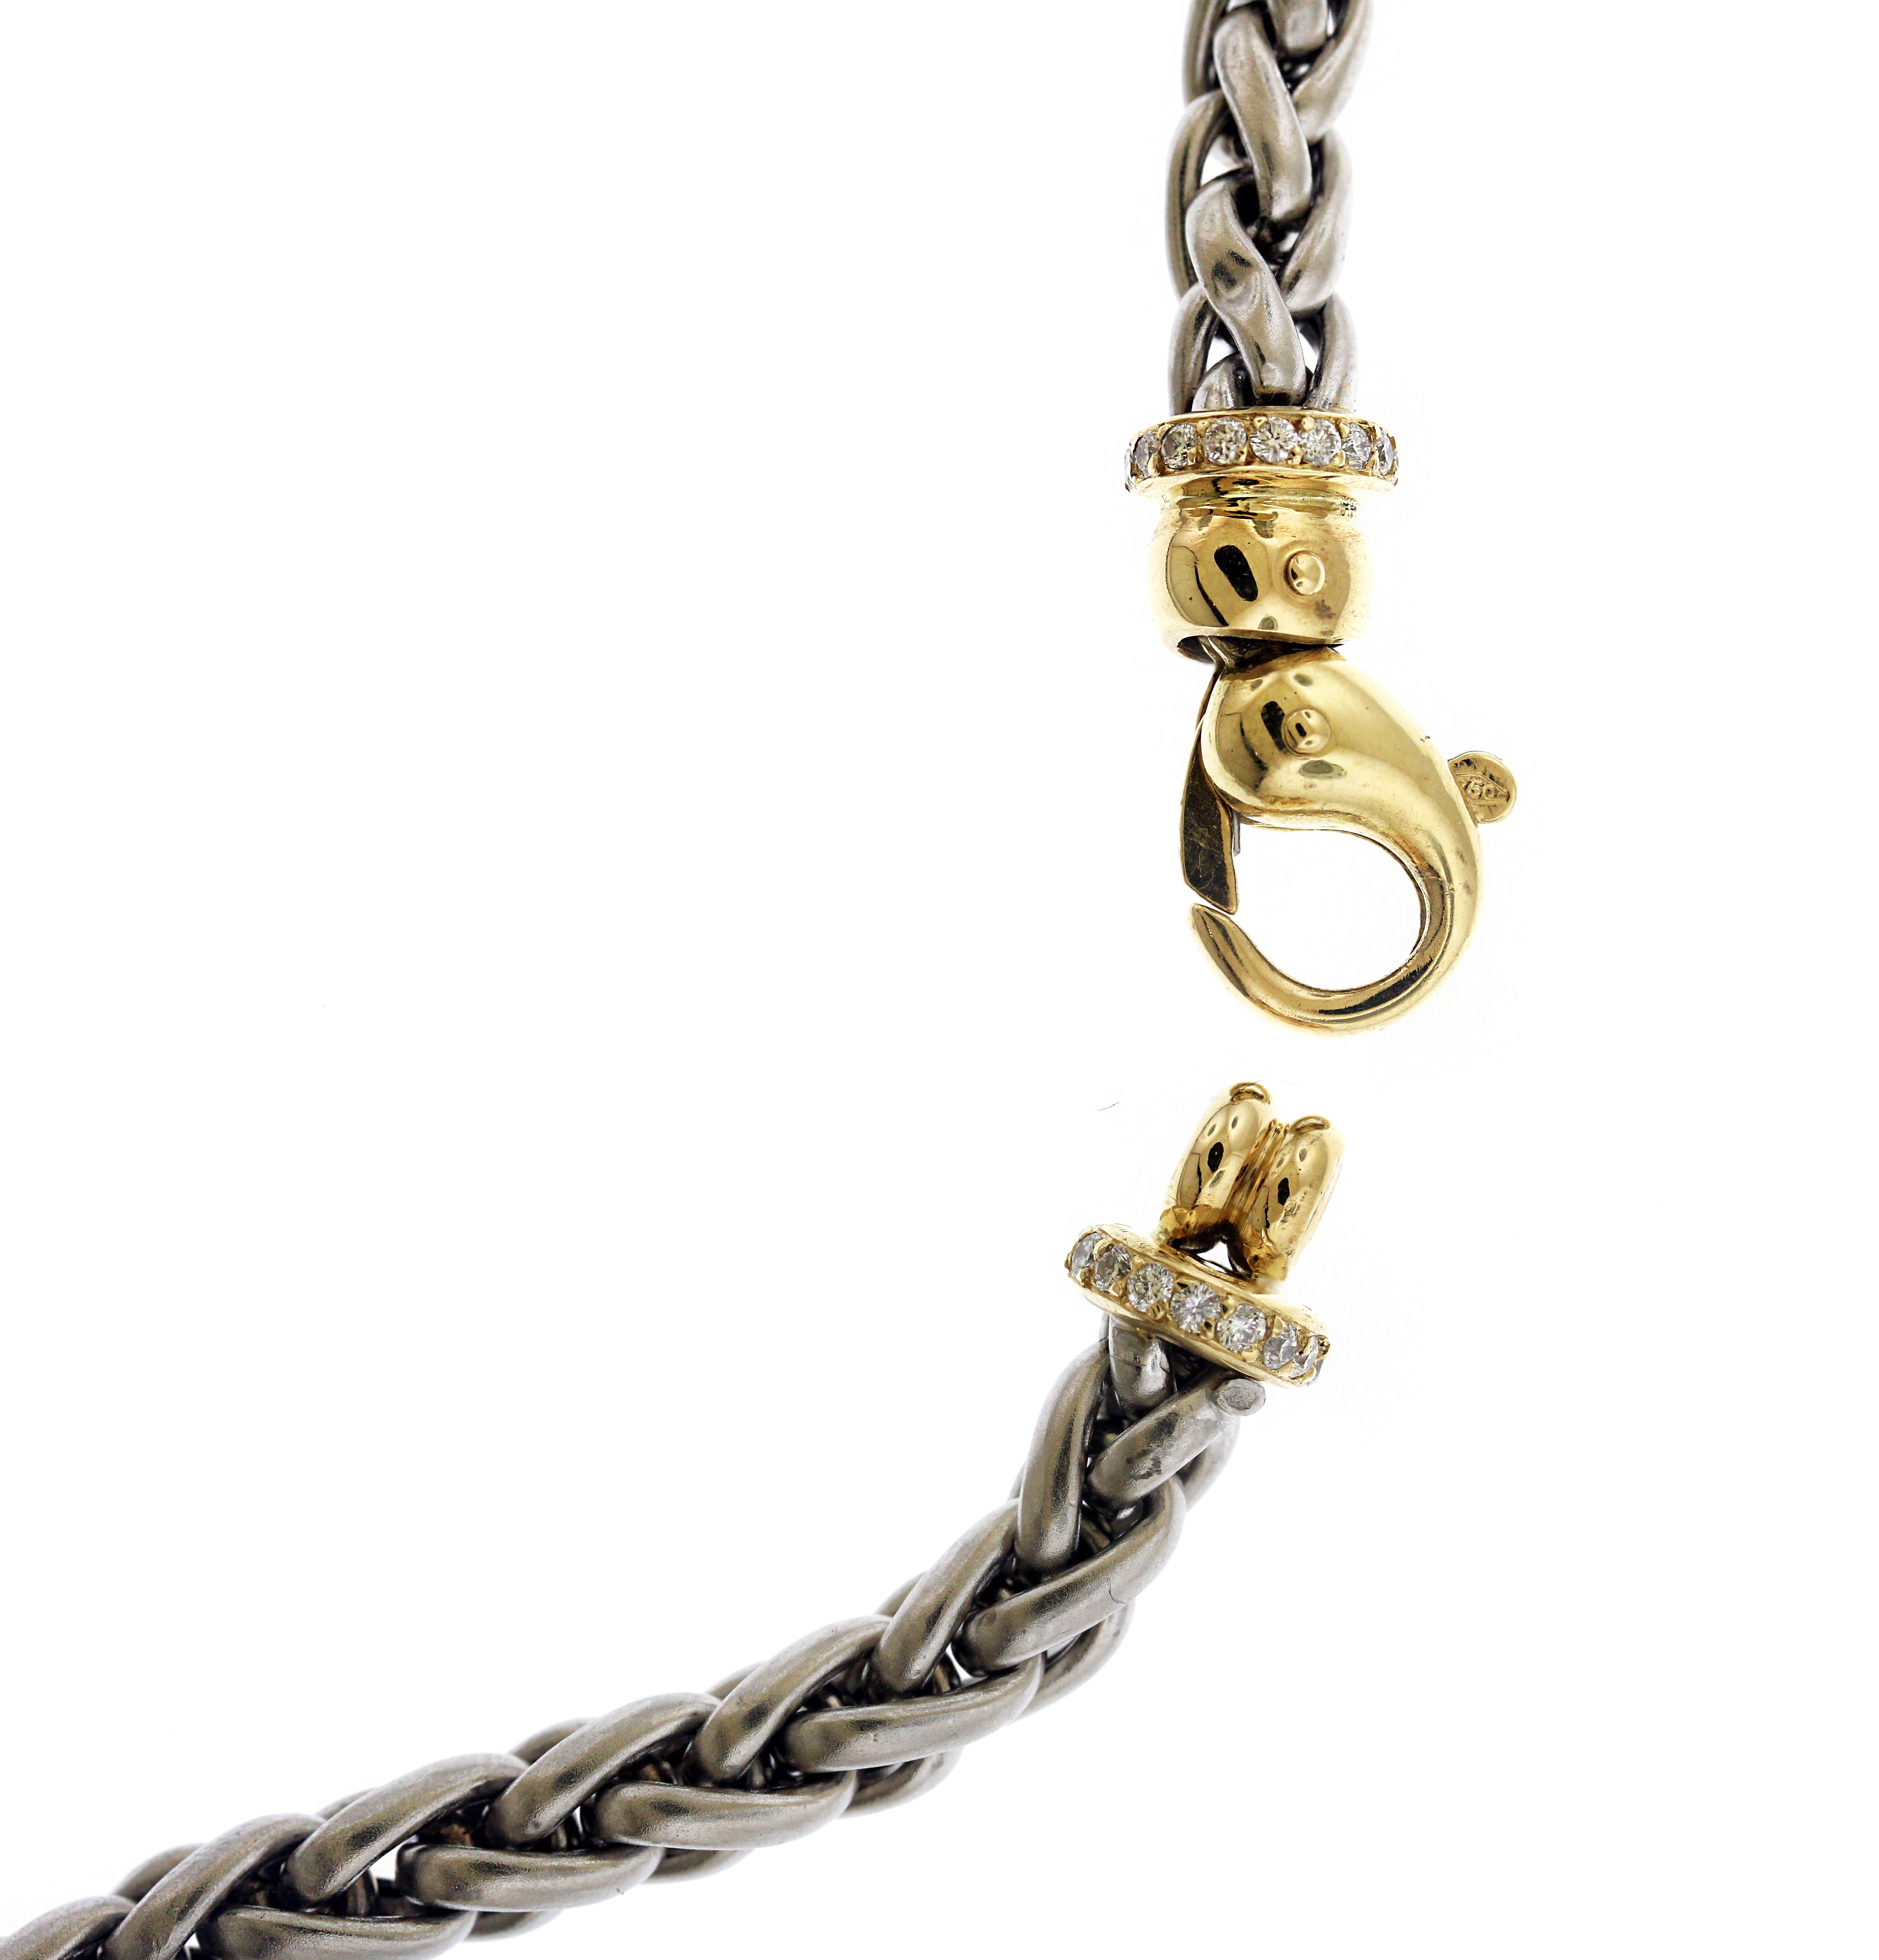 Platinum and 18K Yellow Gold Chain Necklace with Diamond Lobster Clasp

Three diamond links are present set in 18K yellow gold. 

Necklace is 16 inches in length. 0.3 inch width.

Lobster clasp is meant to be shown on the side rather than the back